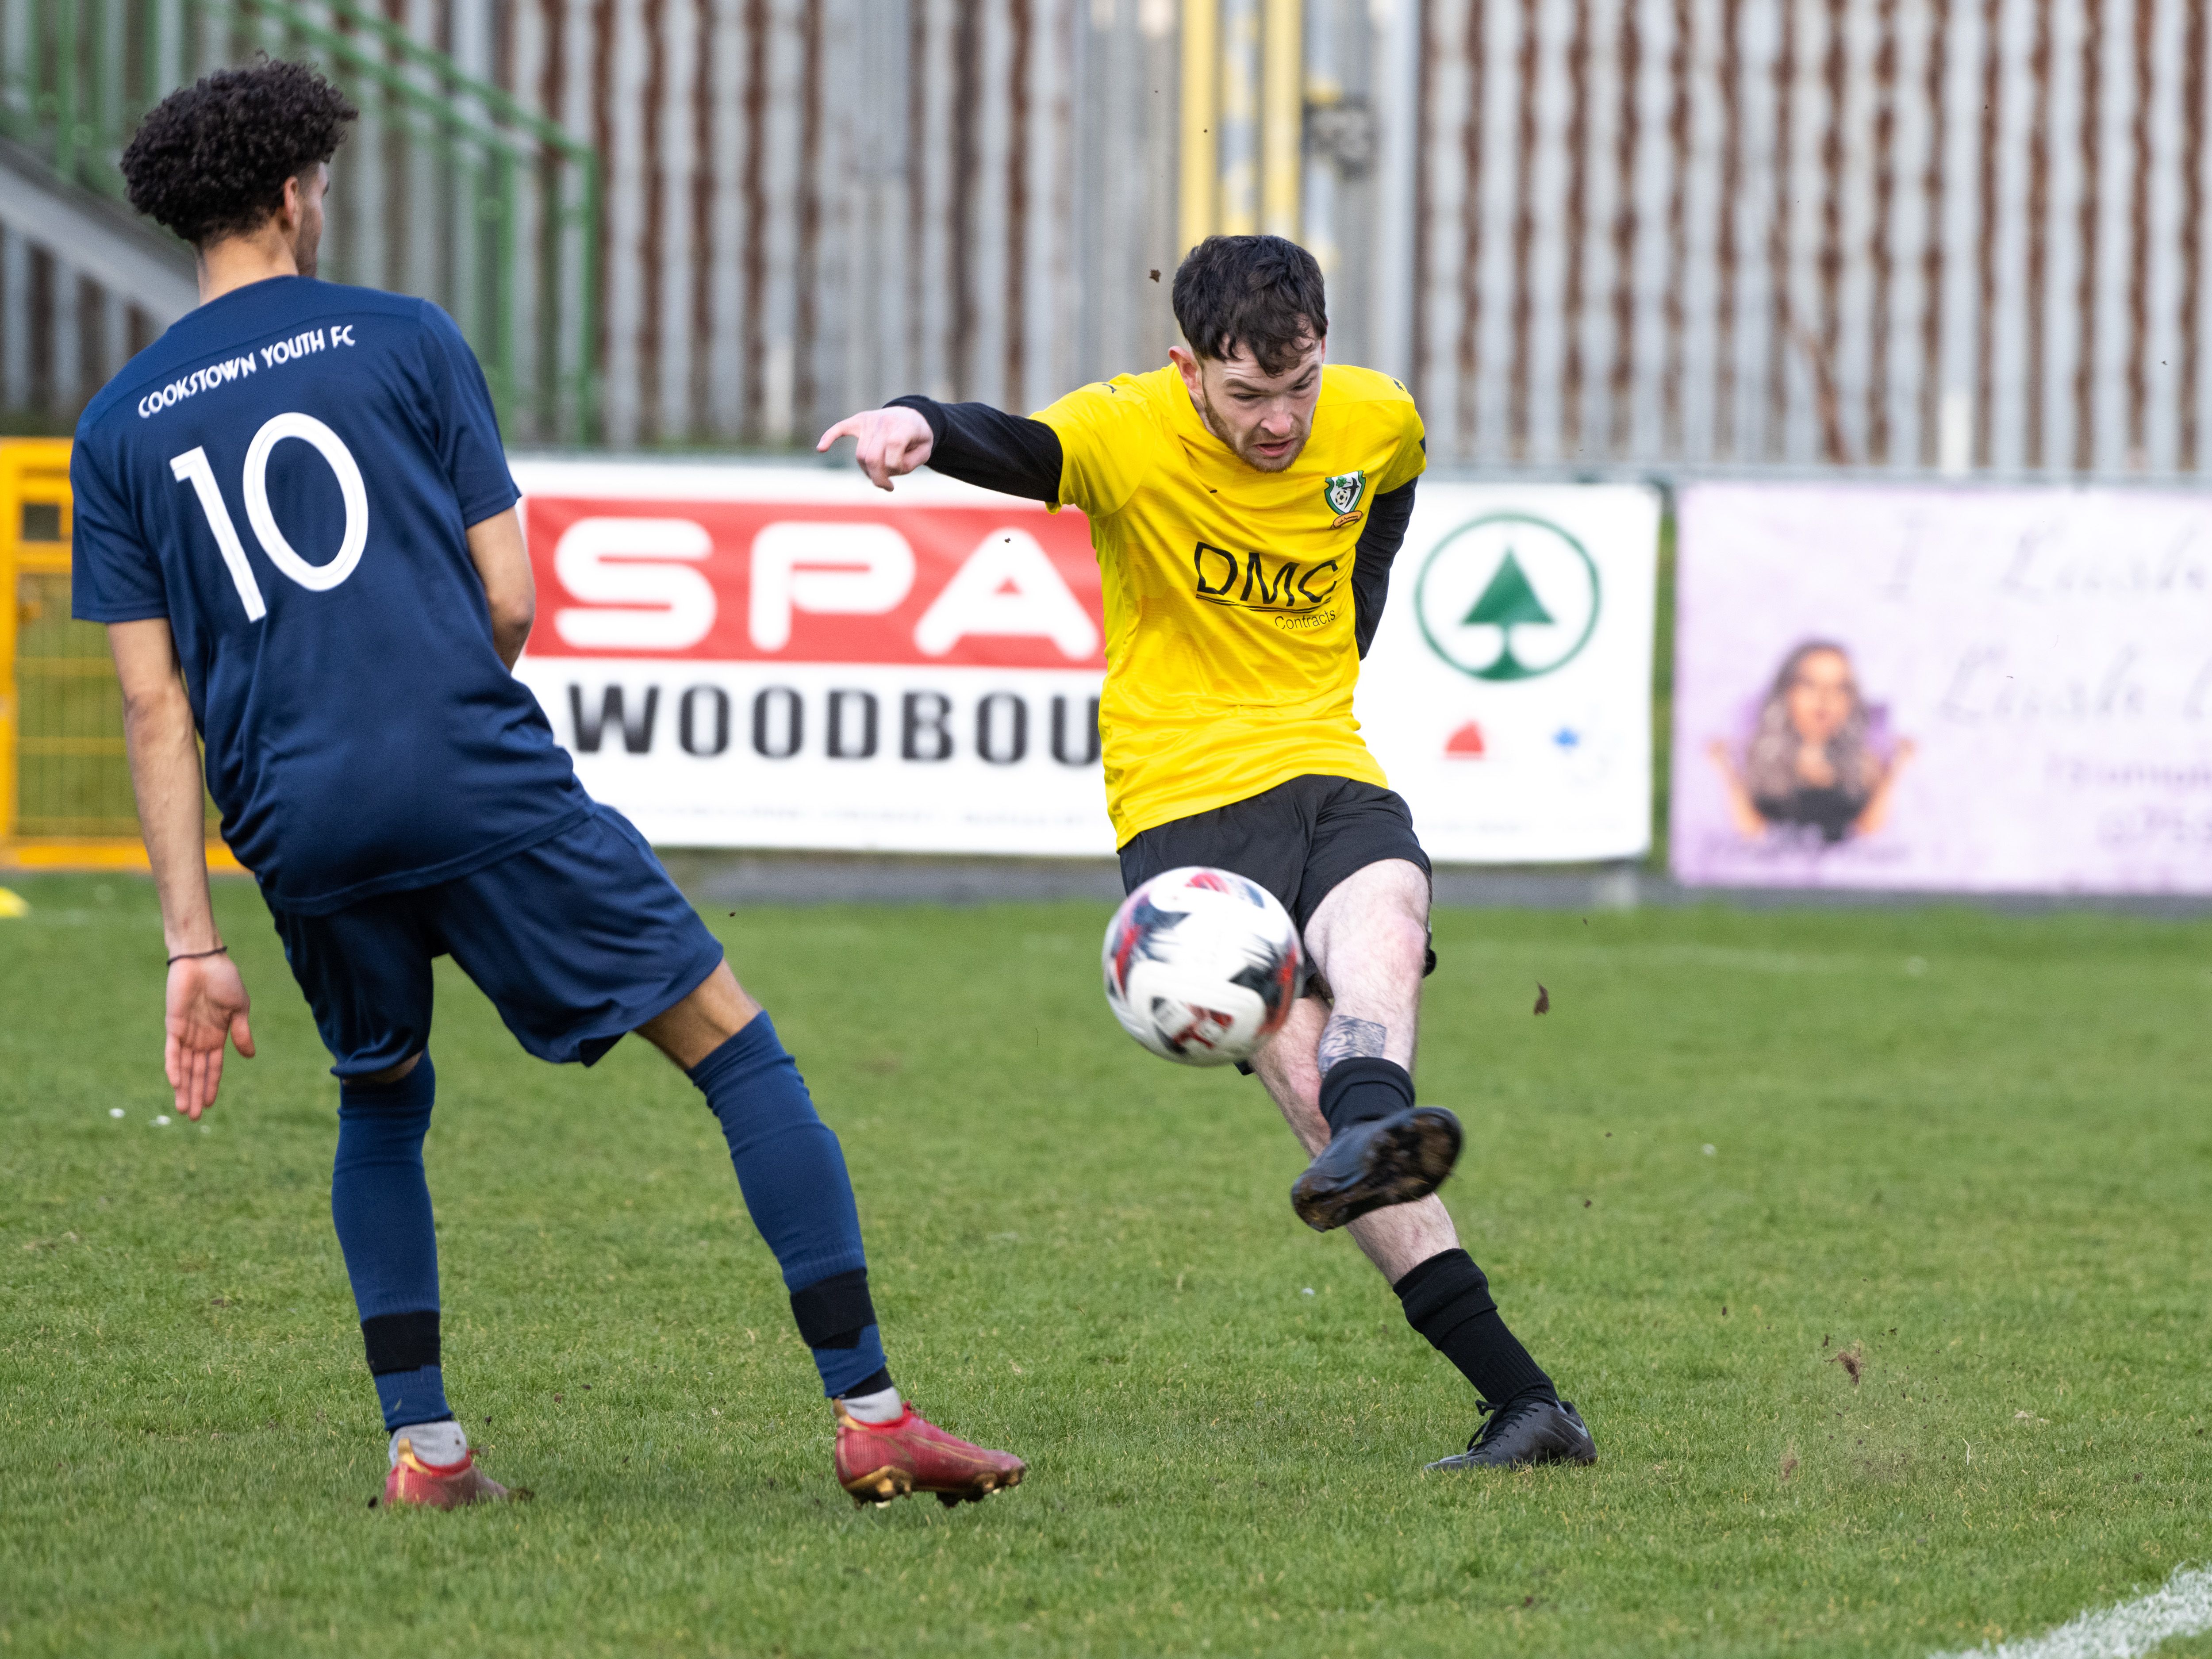 St James Swifts on the attack on Saturday